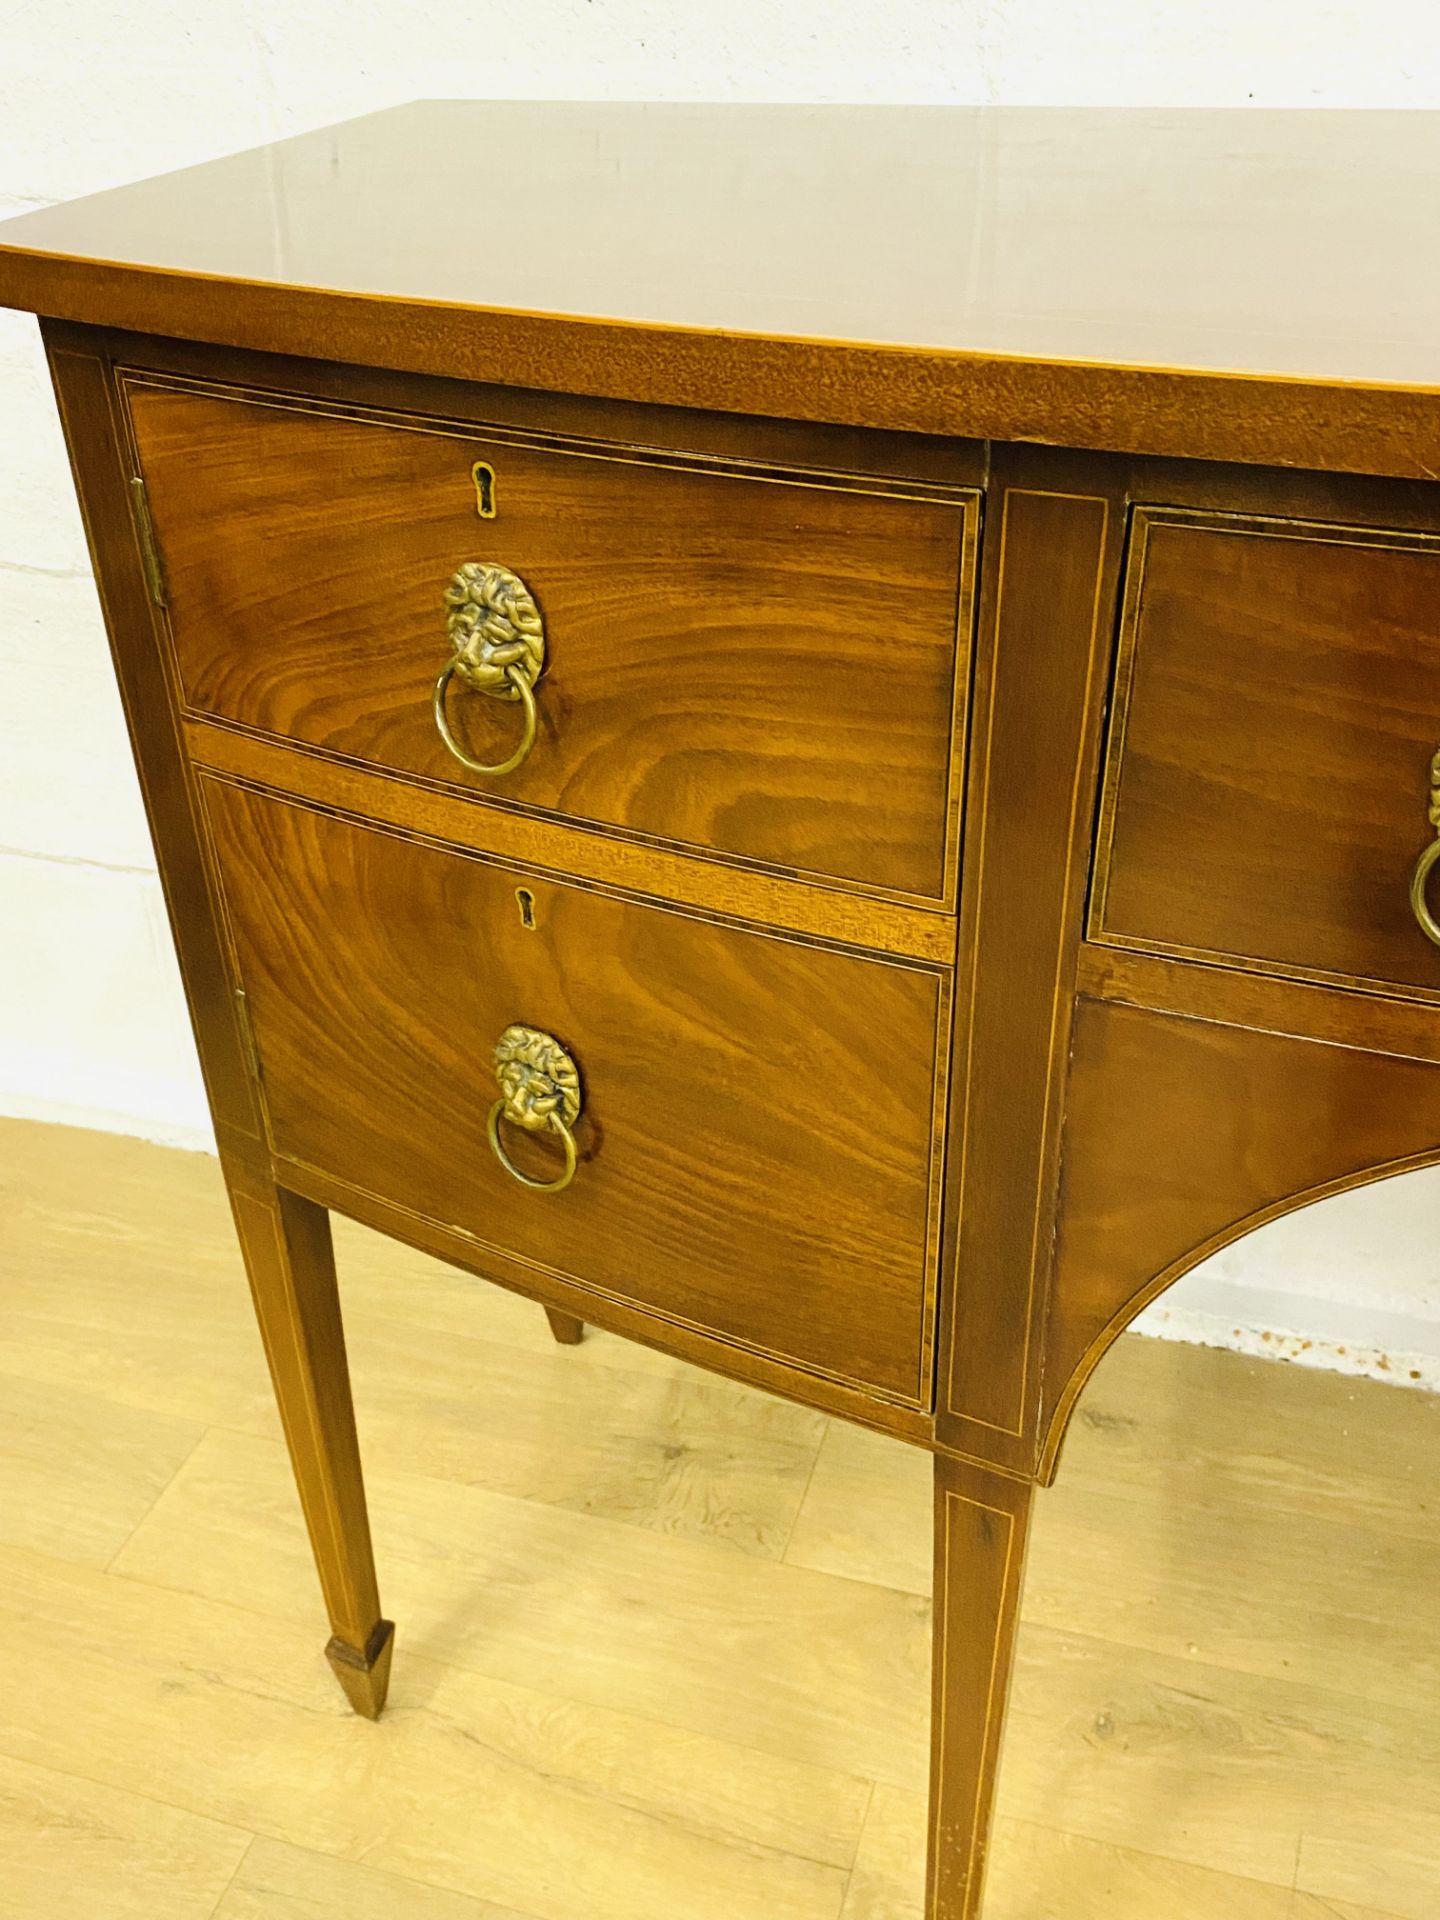 Bow fronted sideboard - Image 7 of 7